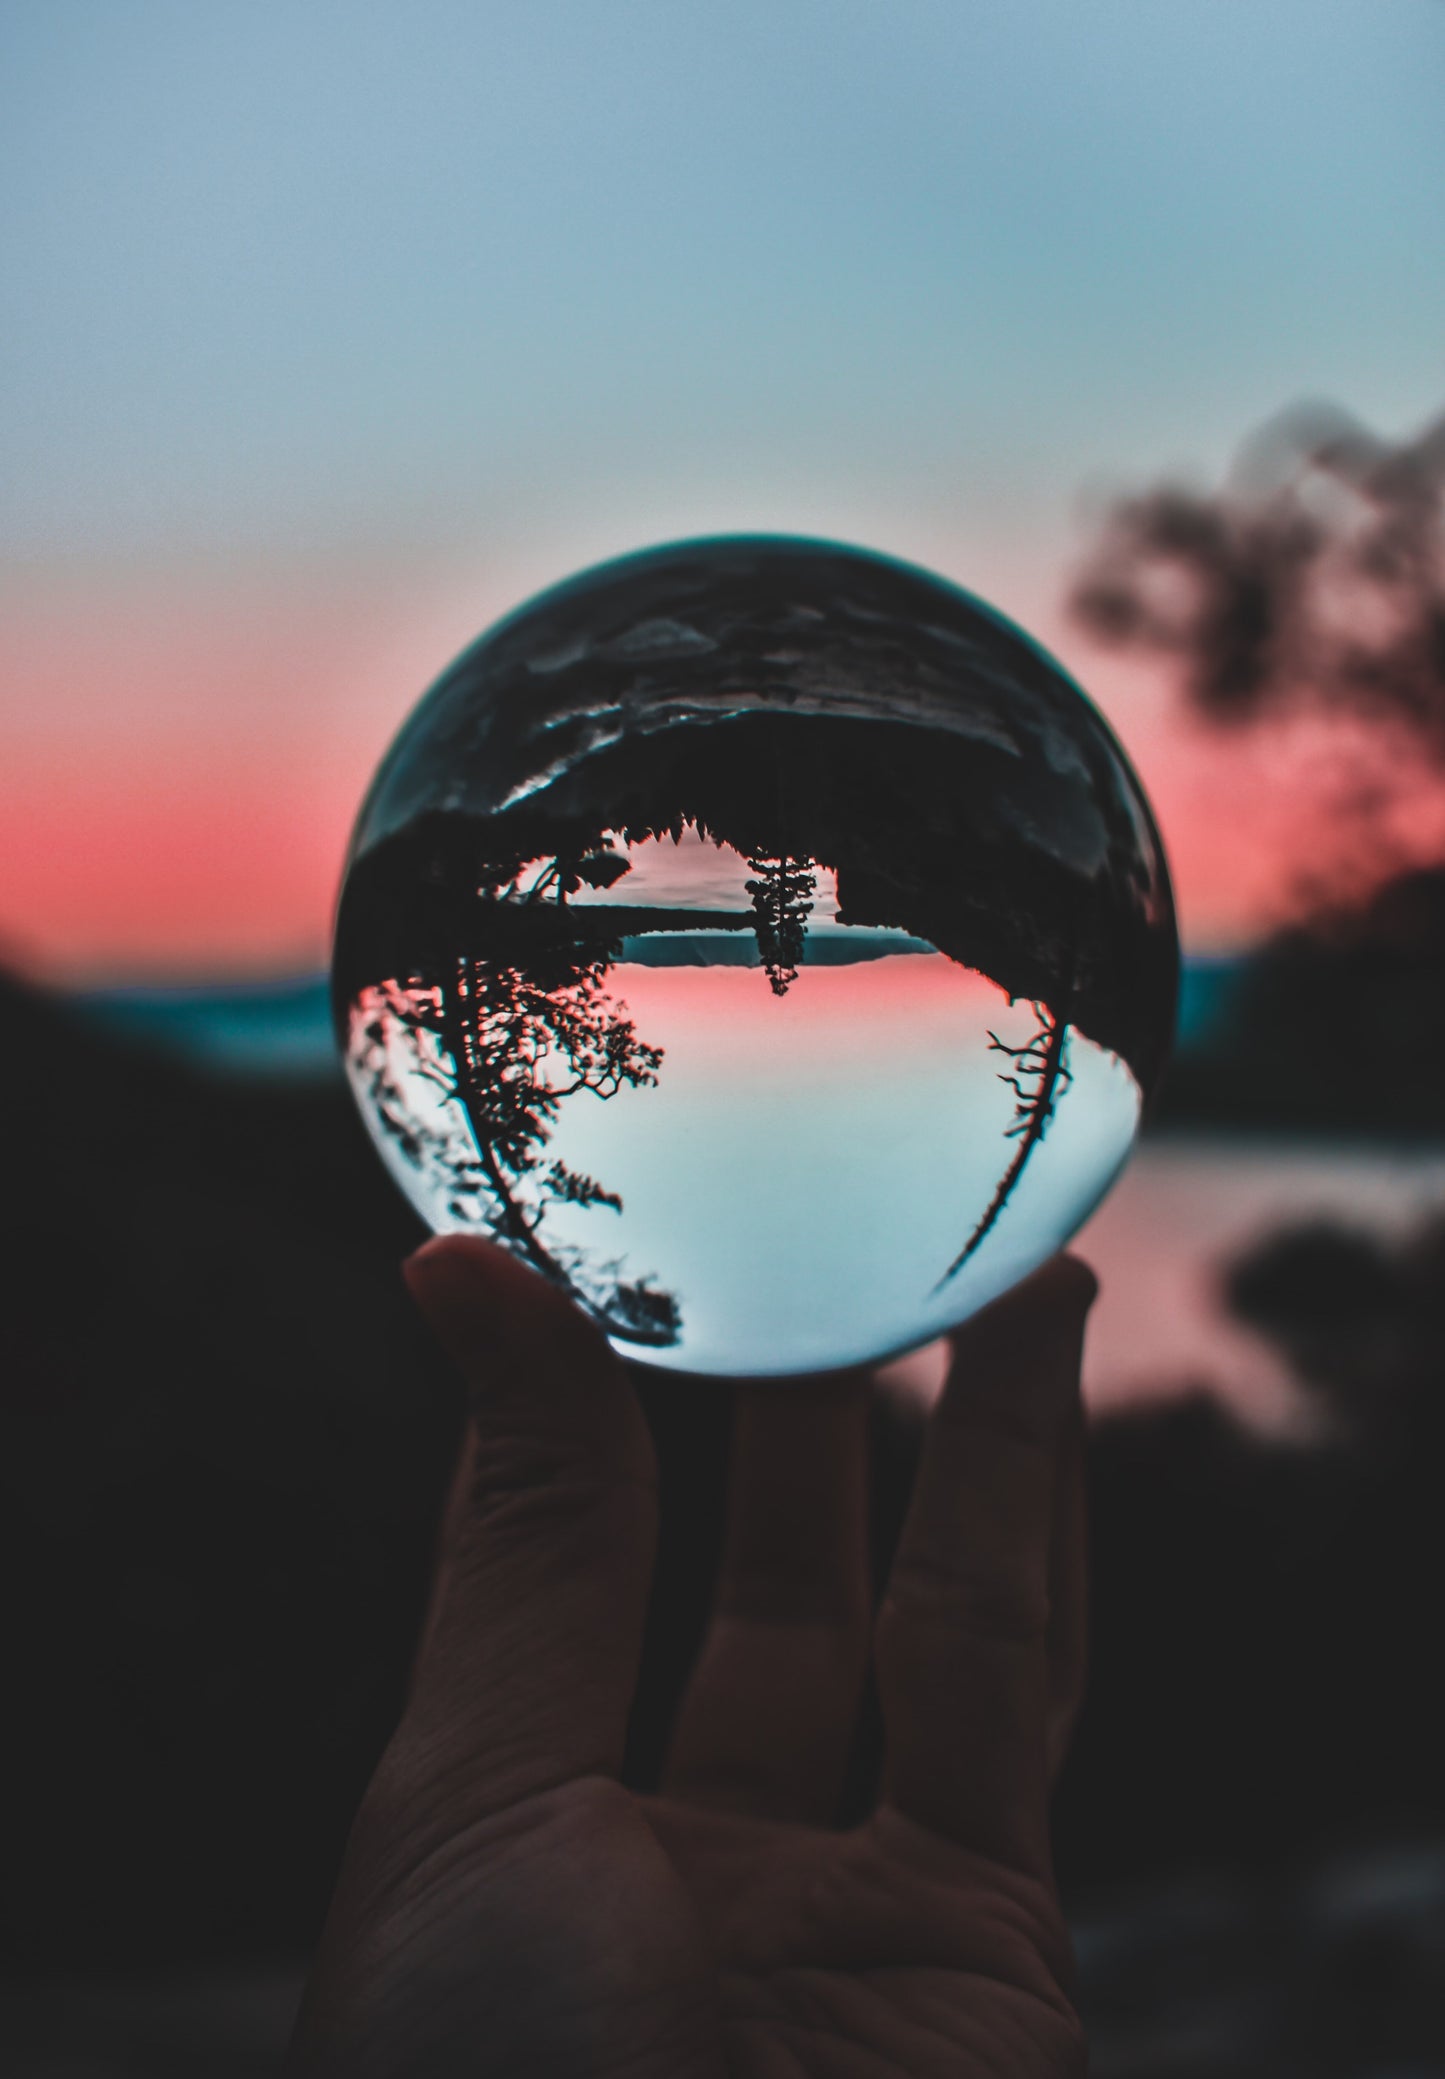 Trees are reflected upside-down inside of a crystal ball balancing in someone's hand.